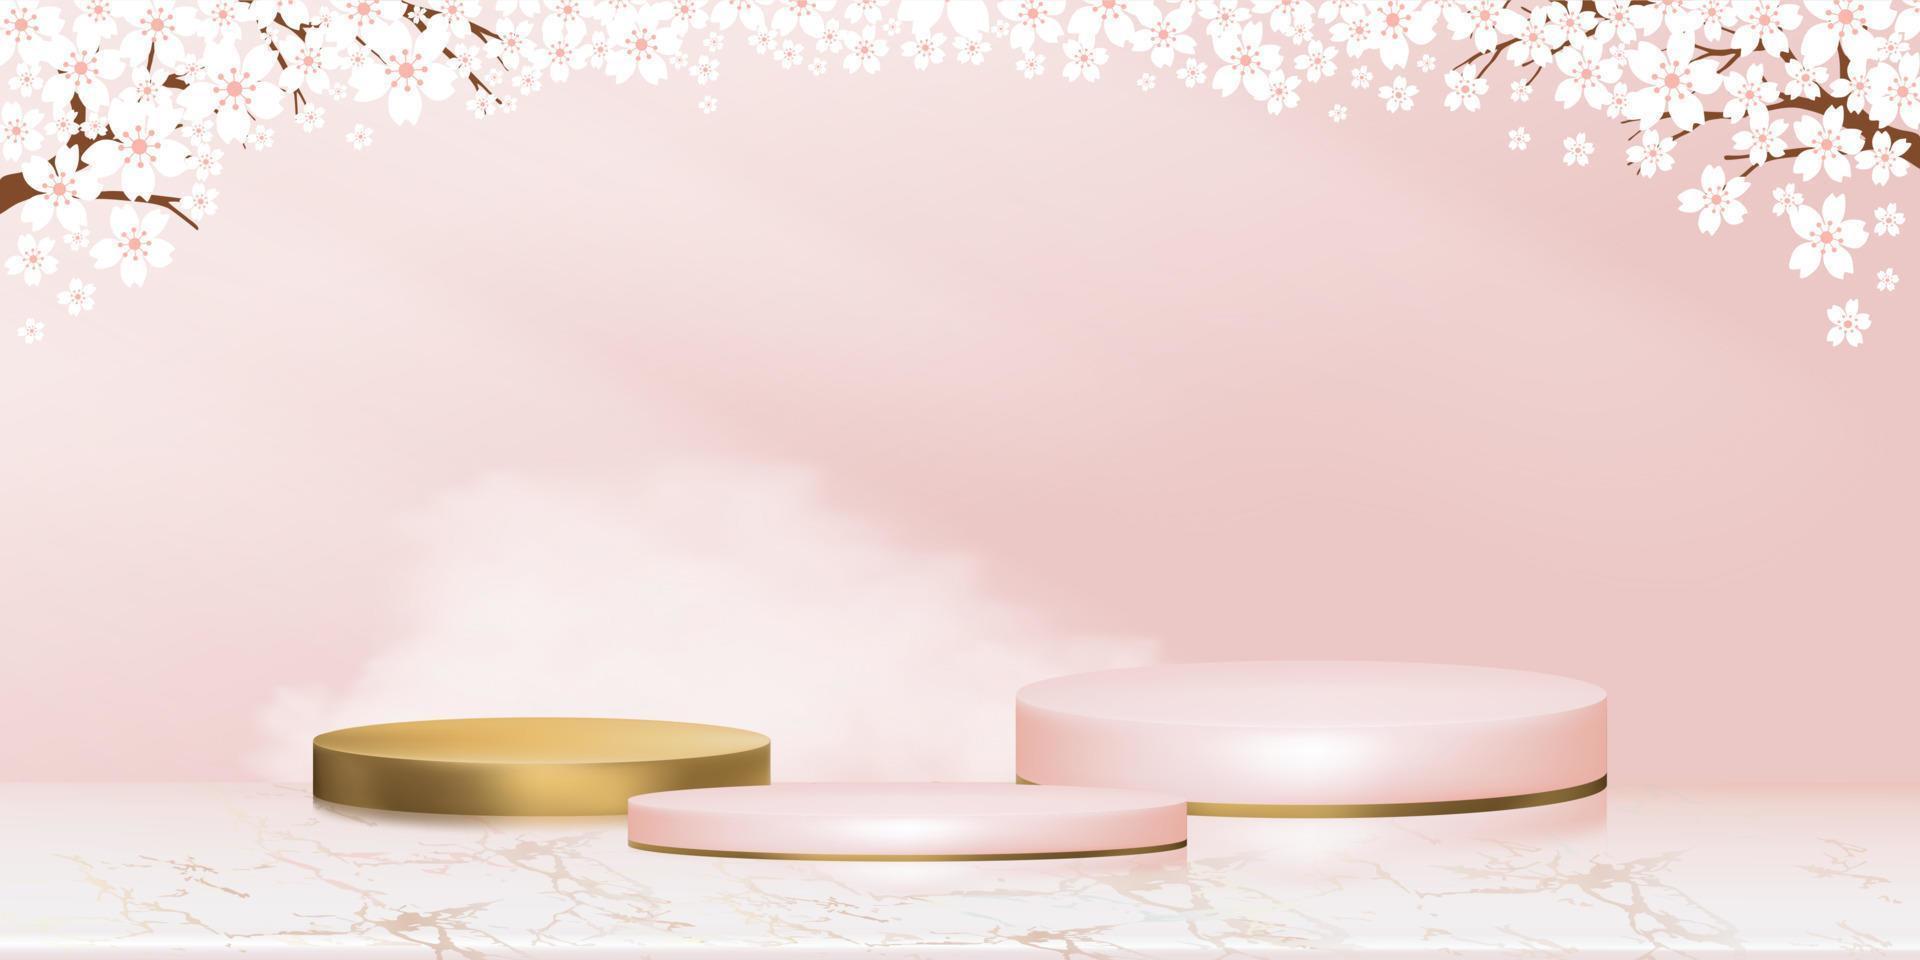 Studio room,Golden Podium with Spring Apple Blossom on Pink Sky background,Vector 3D backdrop banner Cylinder Stand platform on Rose gold foil Marble with Blossoming branches pink sakura vector